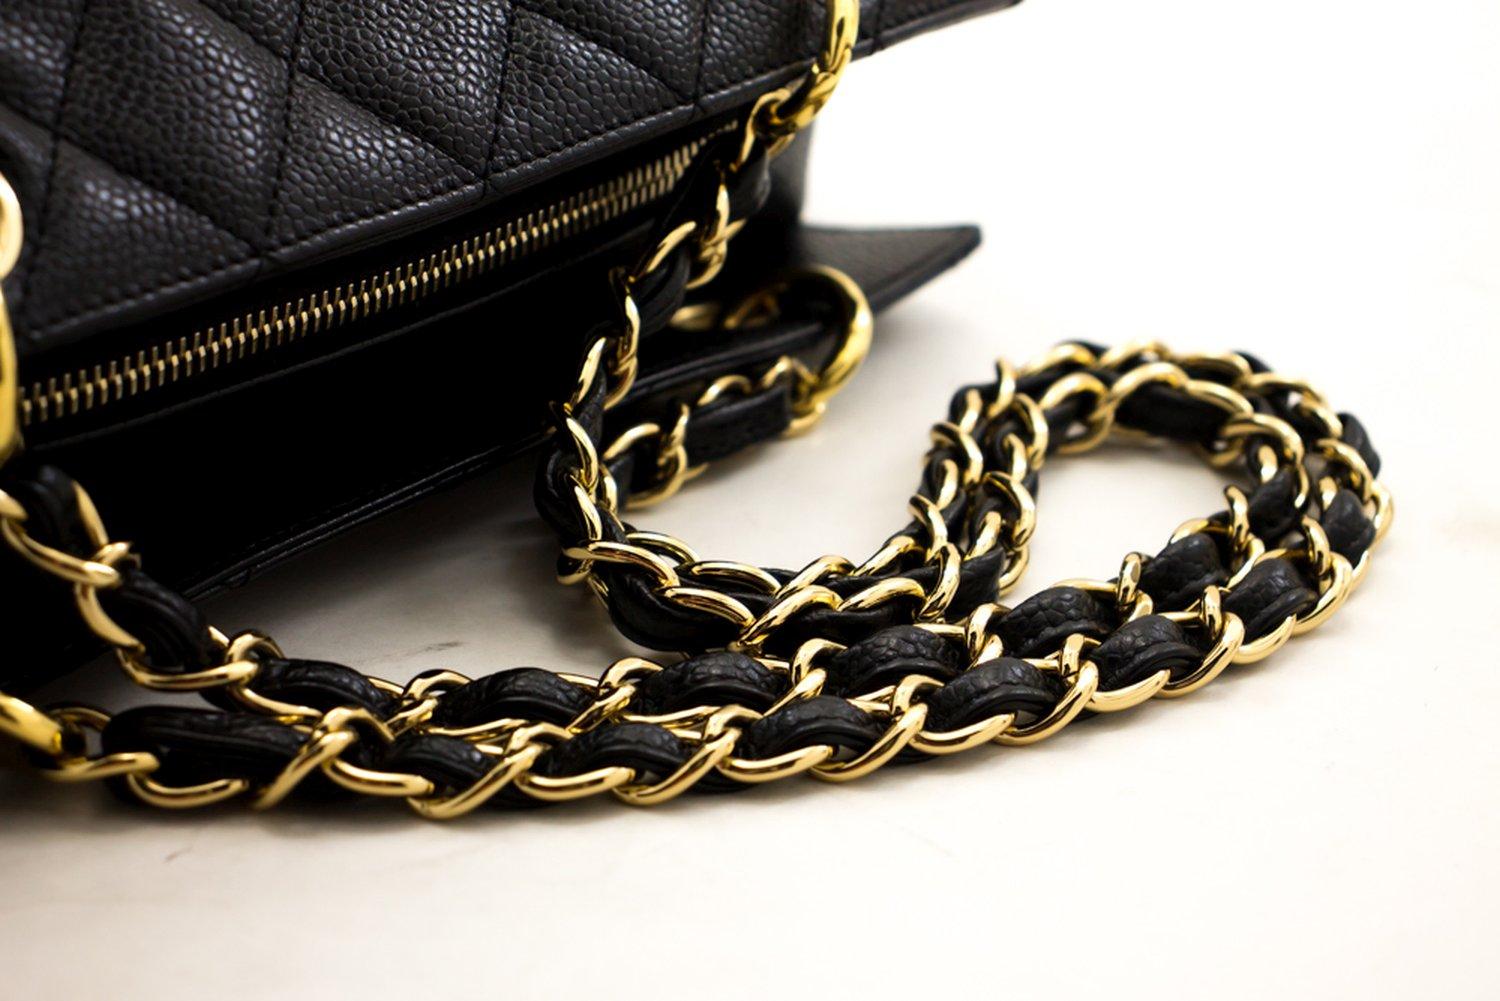 CHANEL Caviar Chain Shoulder Shopping Tote Bag Black Quilted Purse 9